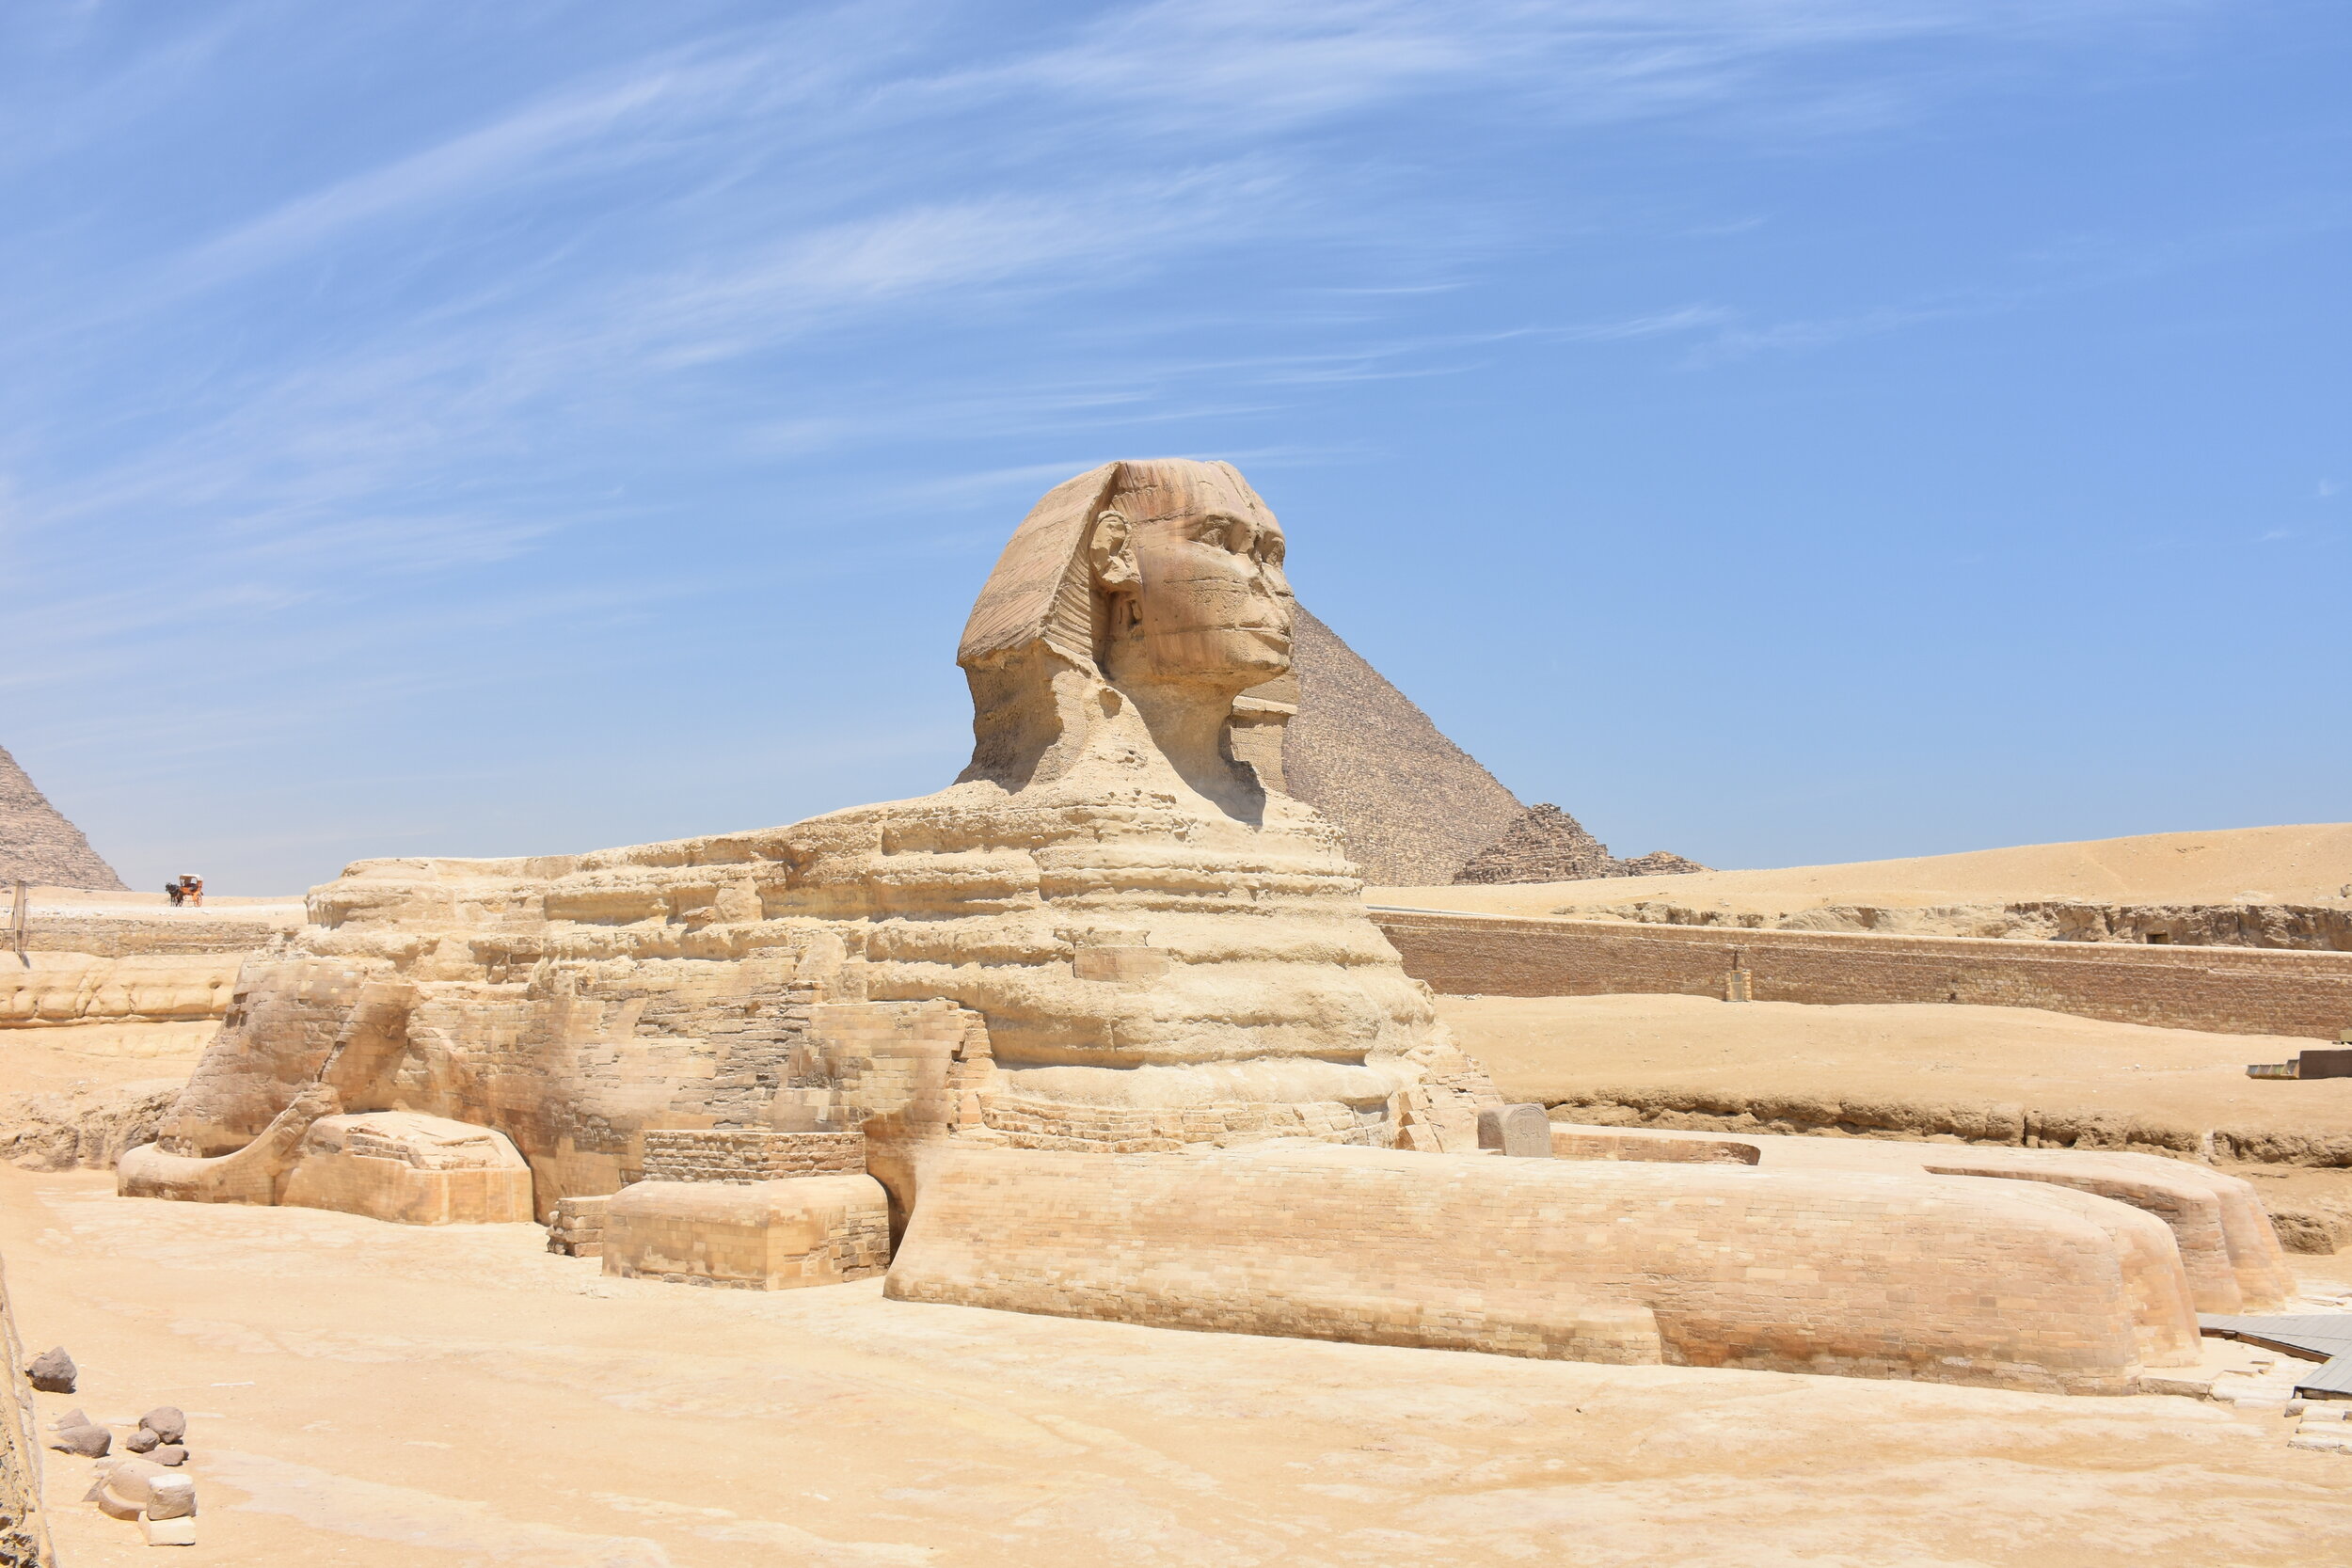 Great_Sphinx_of_Giza_May_2015.jpg